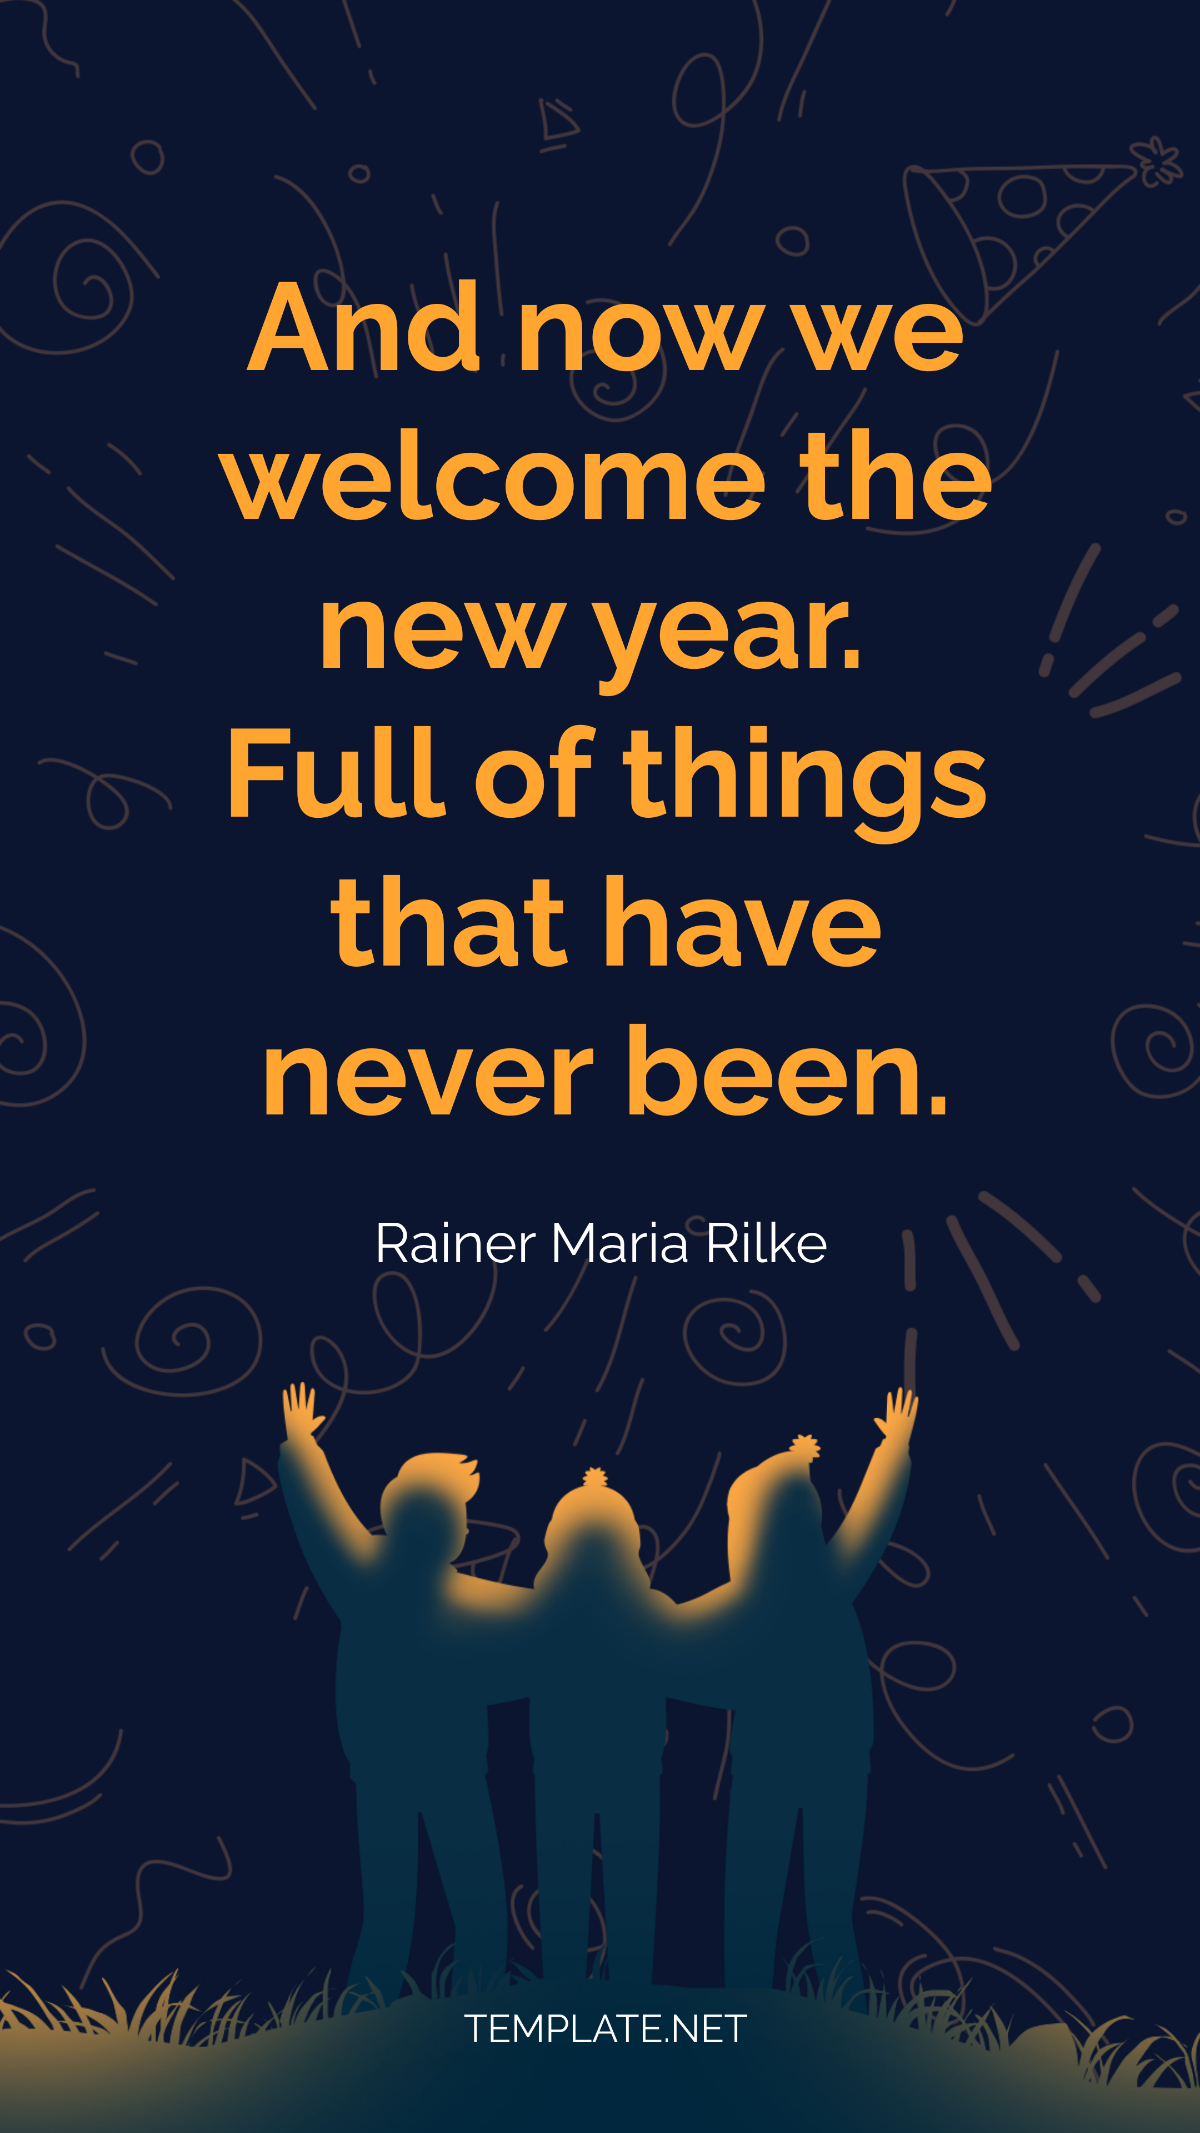 New Year Adventure Quotes Template